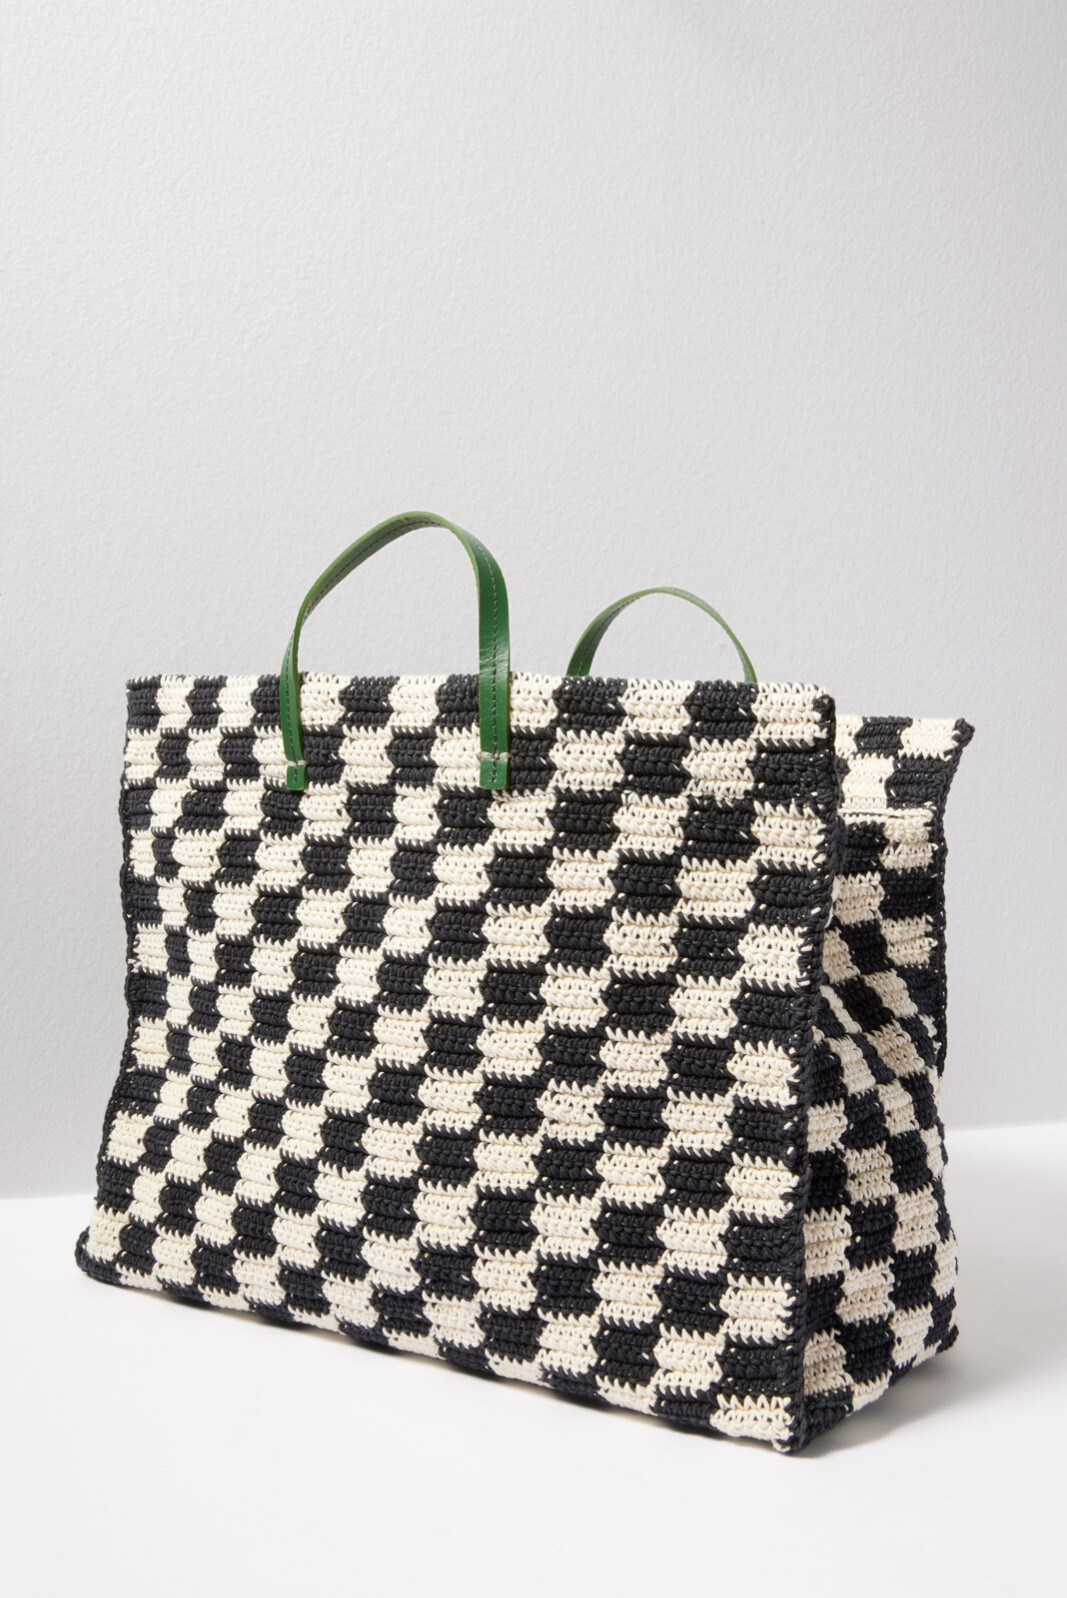 clare v simple tote review